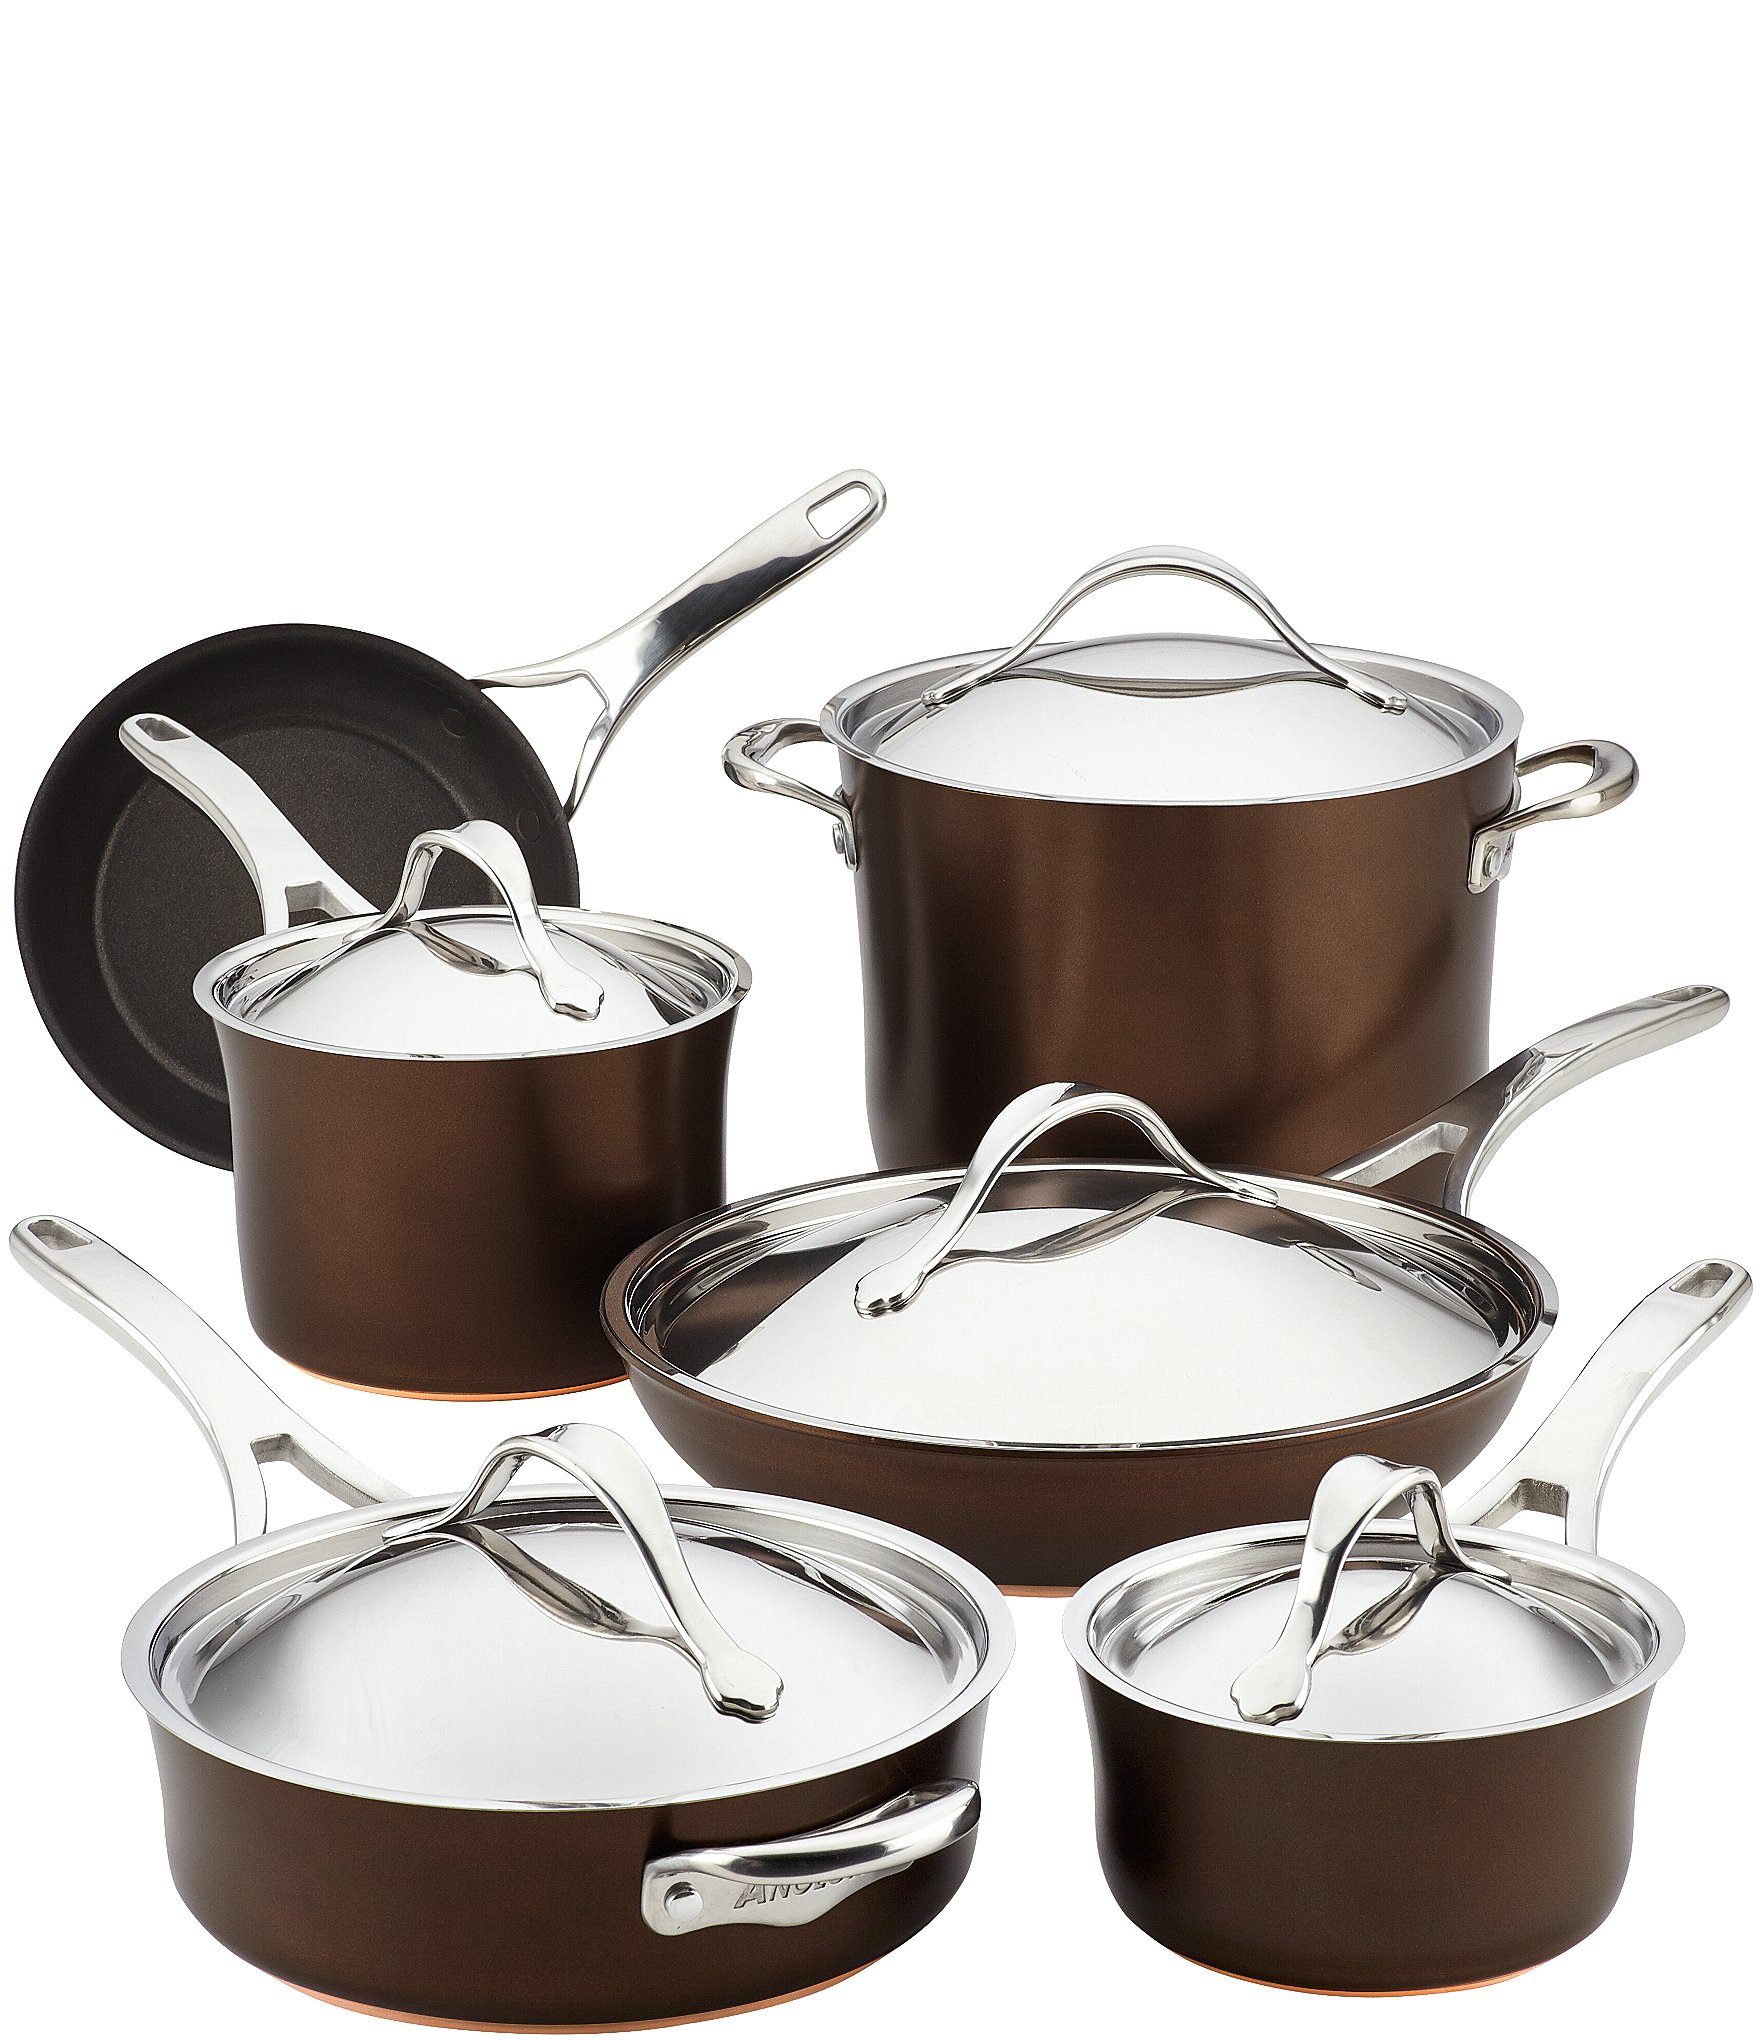 NuWave 12-Piece Forged Cookware Set Copper 31424 - Best Buy